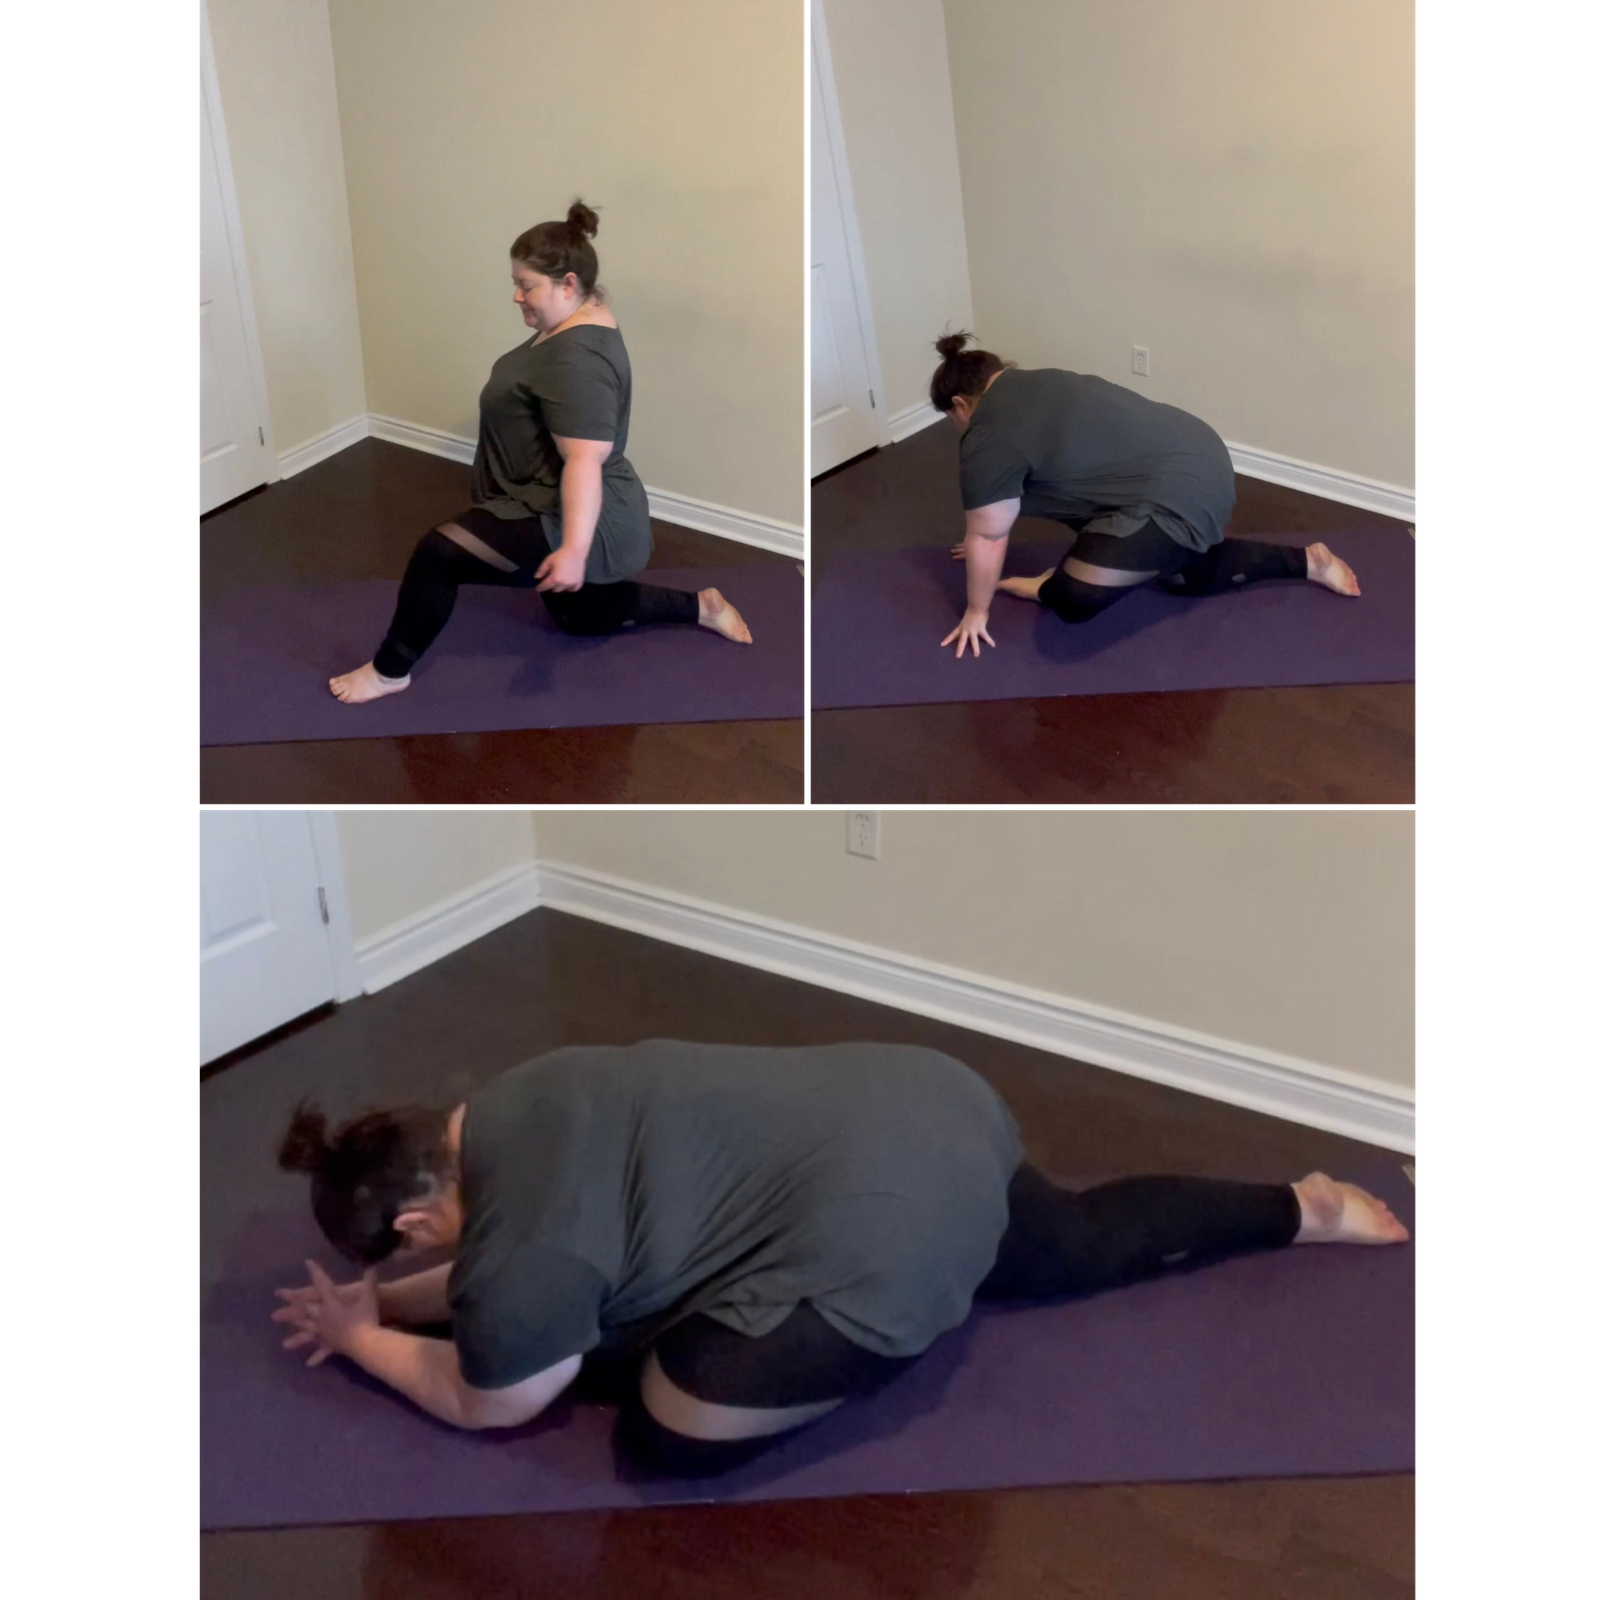 Spark Hot Yoga - #trysomethingnewtuesday has struck again with a very  reptilian flair! Lizard Variation Warm up: Hips & Hamstrings - Lizard pose, pigeon  pose, half splits, low lunge. Step 1 -